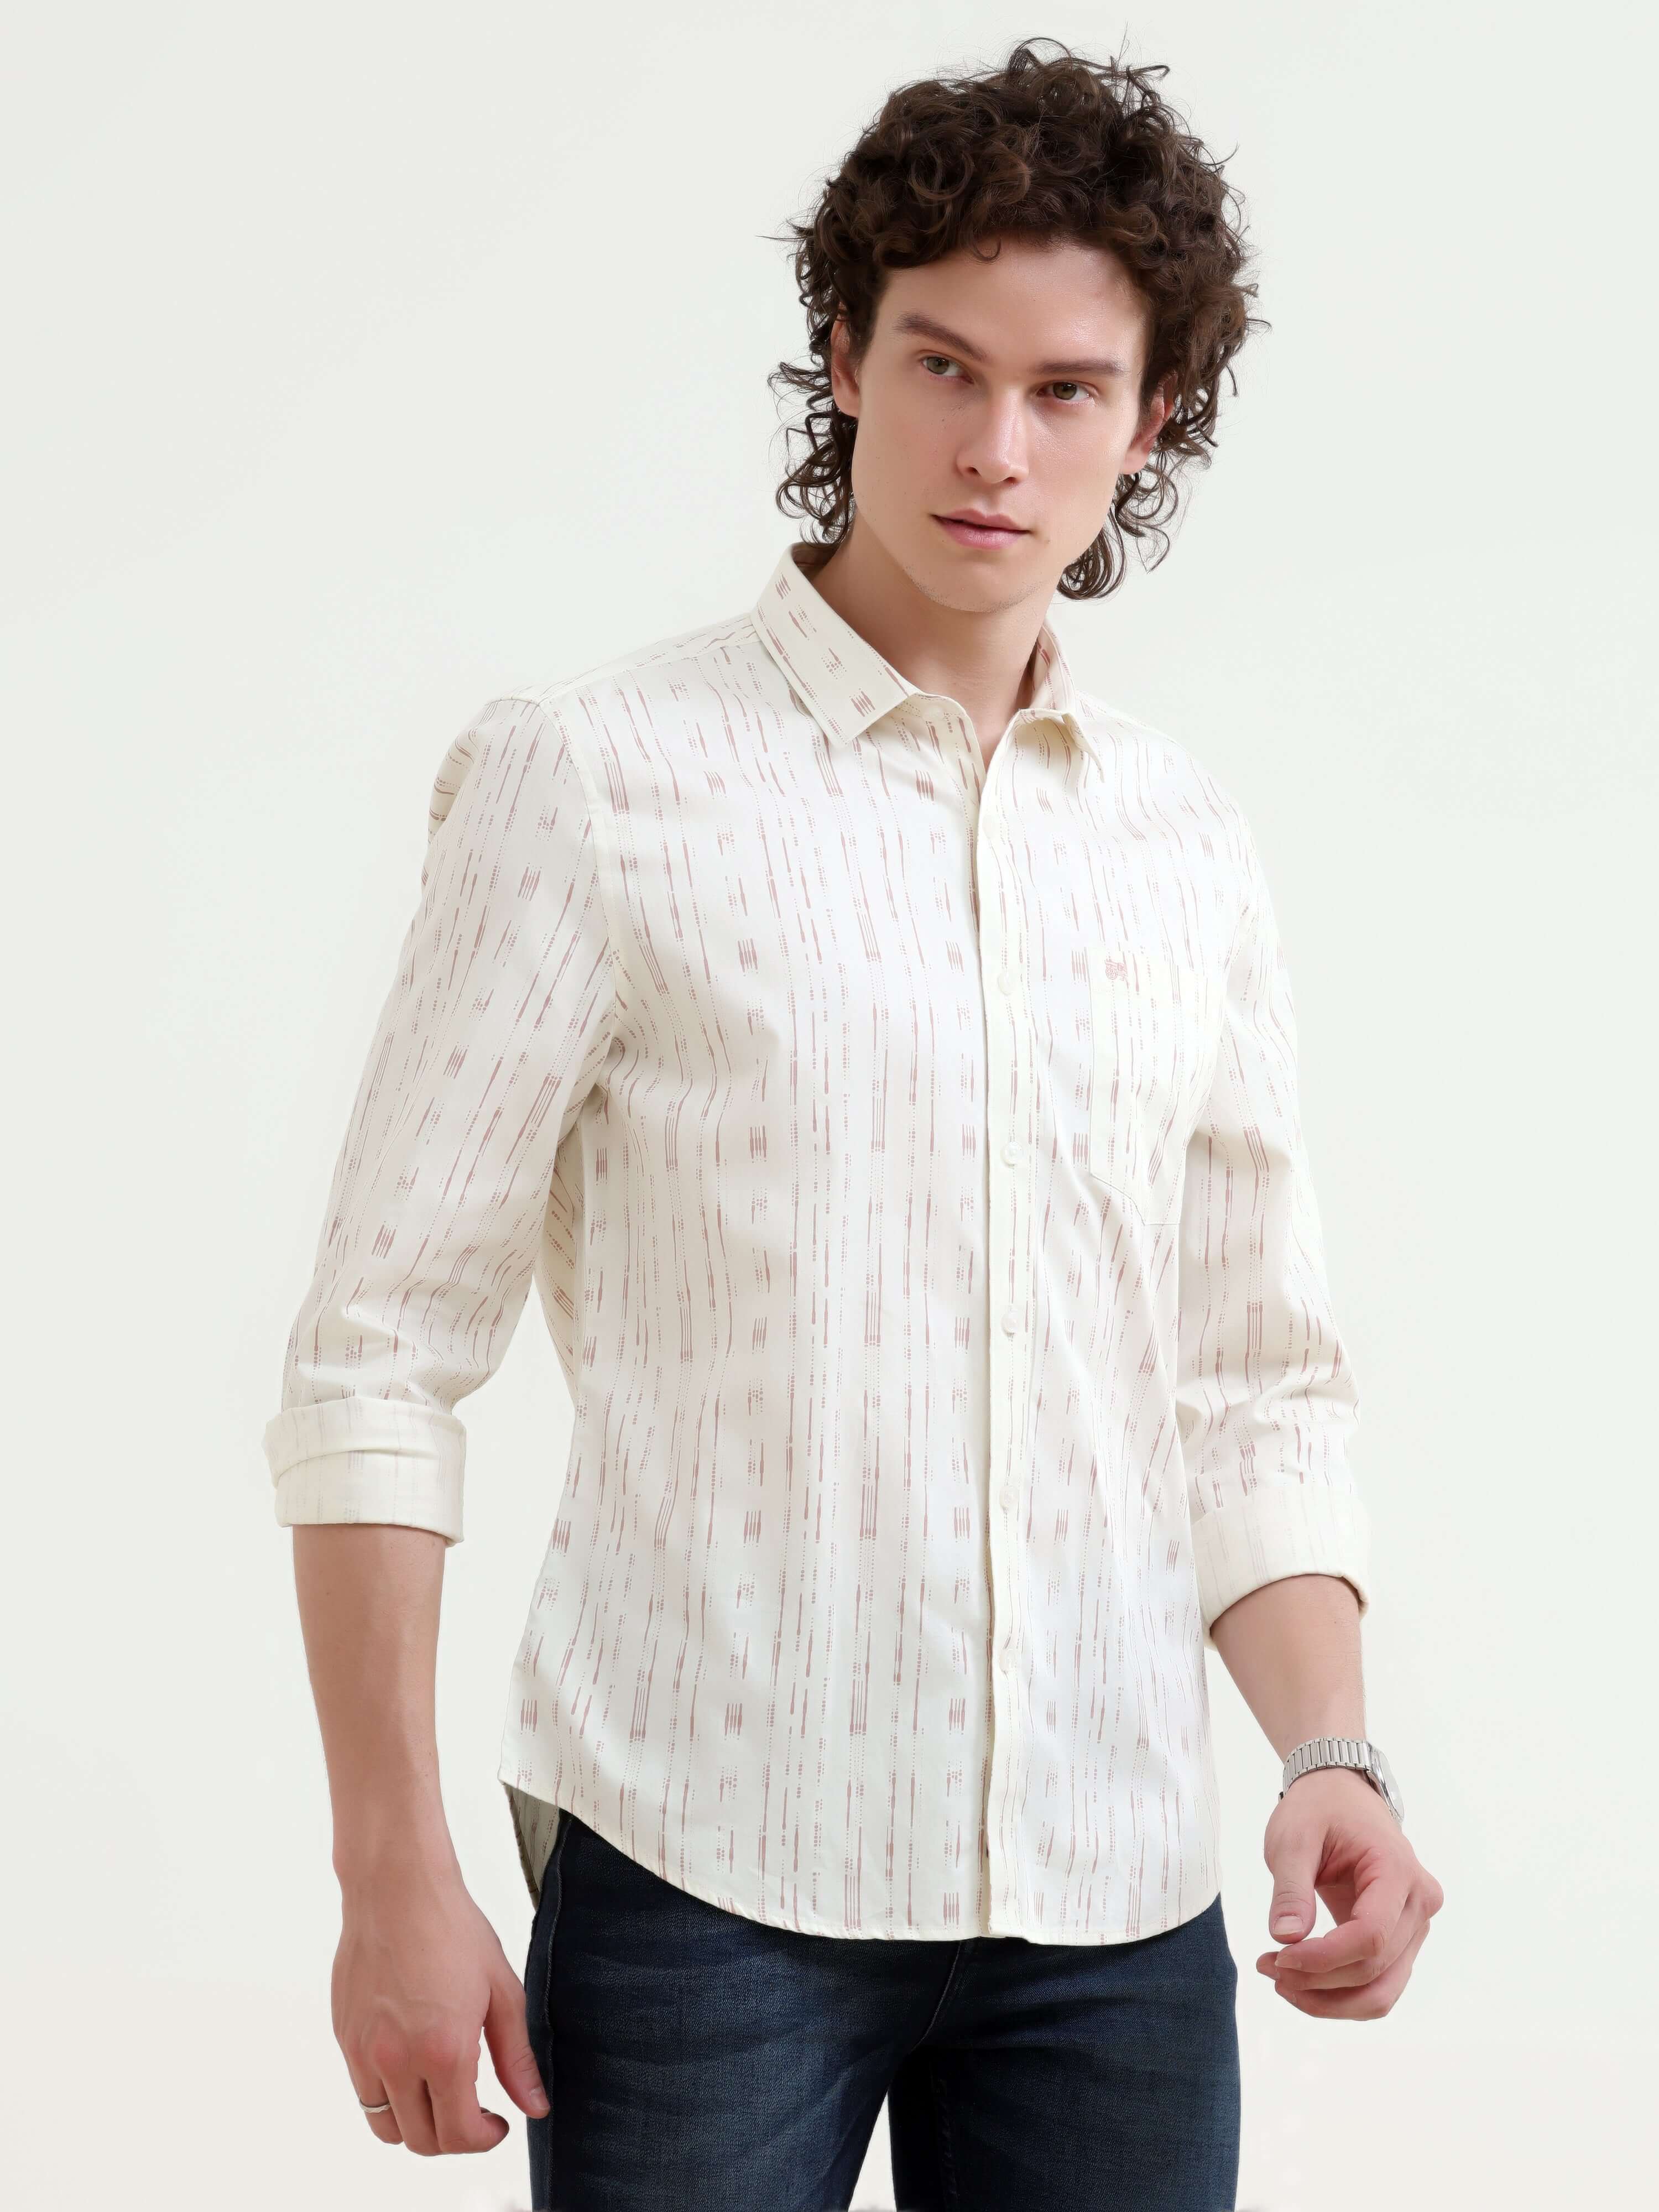 Soren Peach Stripe Shirt - New Men's Summer Casual Wear shop online at Estilocus. Elevate your style with the Soren cotton stripe shirt, your go-to for cool comfort this summer. Shop the new arrival for a fresh look!